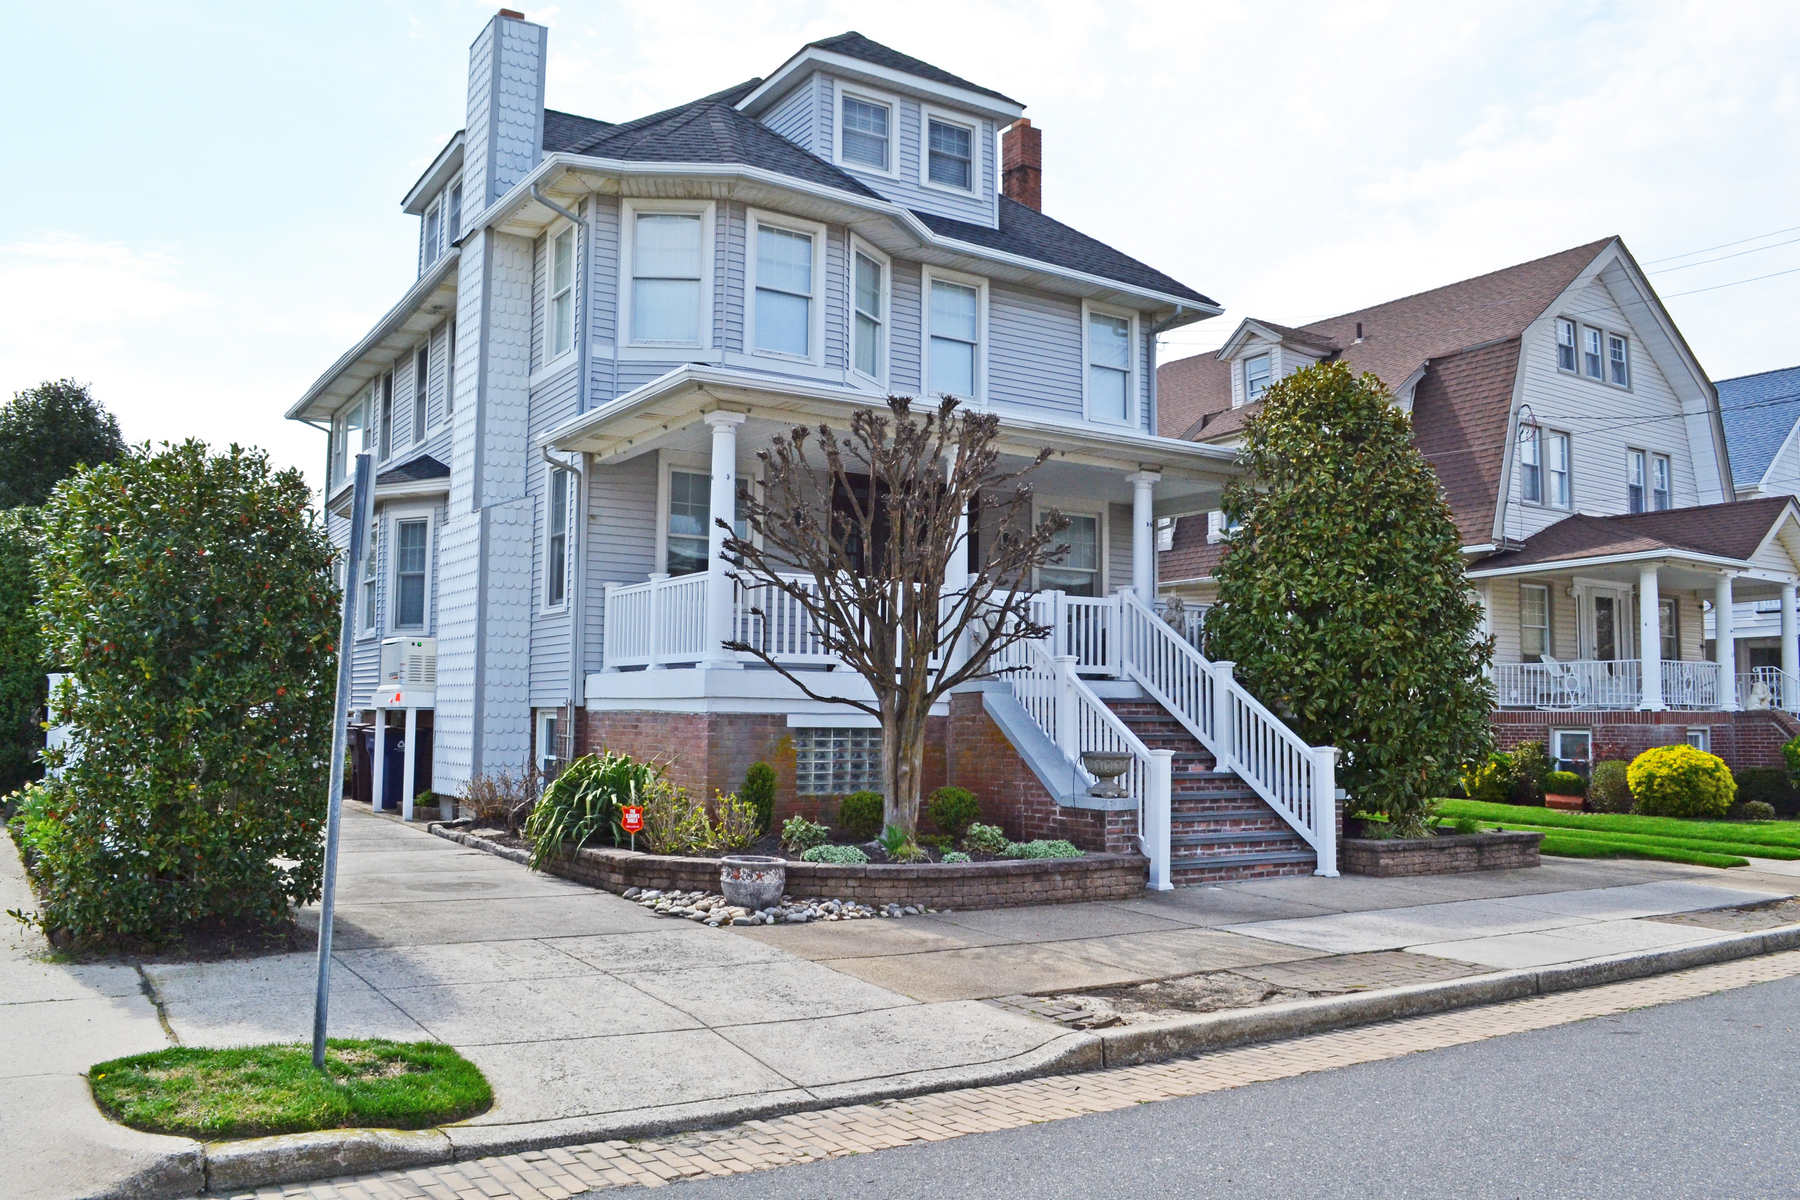 16 S Somerset Ave, July - August, Ventnor, 뉴저지 08406 미국에 Single Family Homes